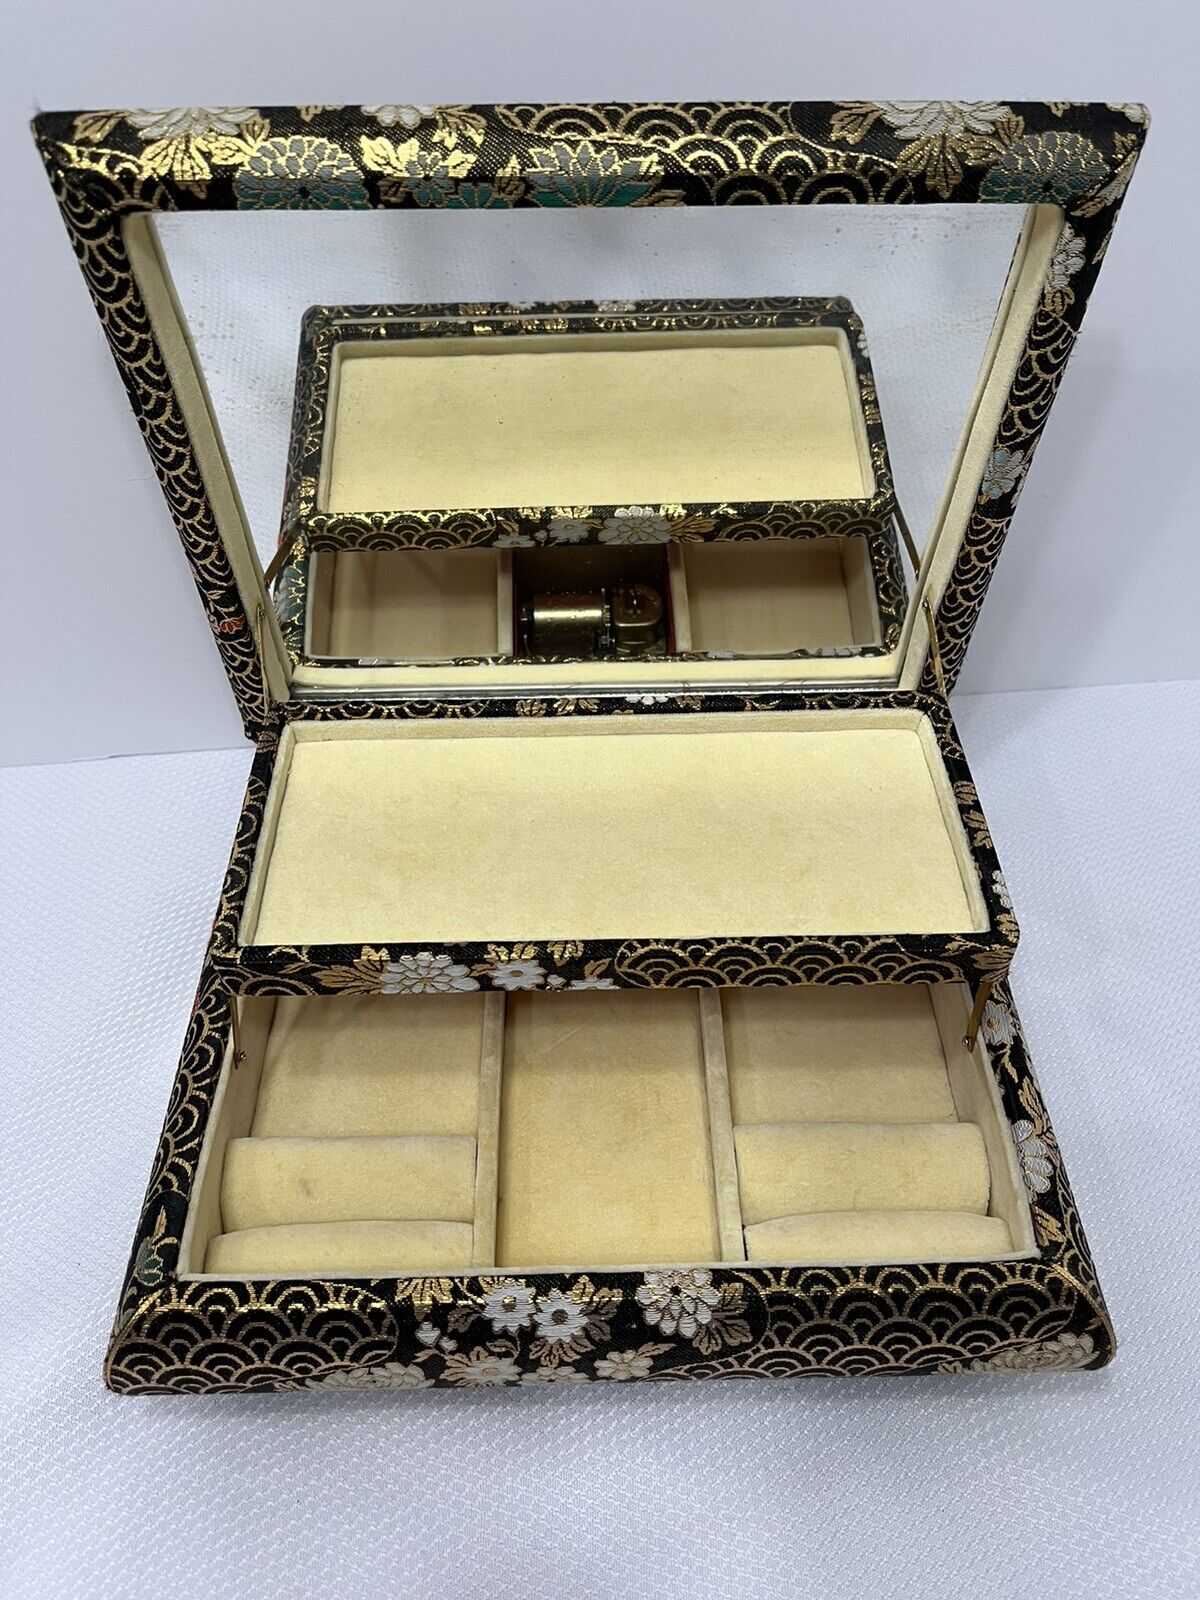 VTG Sankyo Oriental Upholstered Footed Lined Jewelry Sankyo 23 Note Music Box